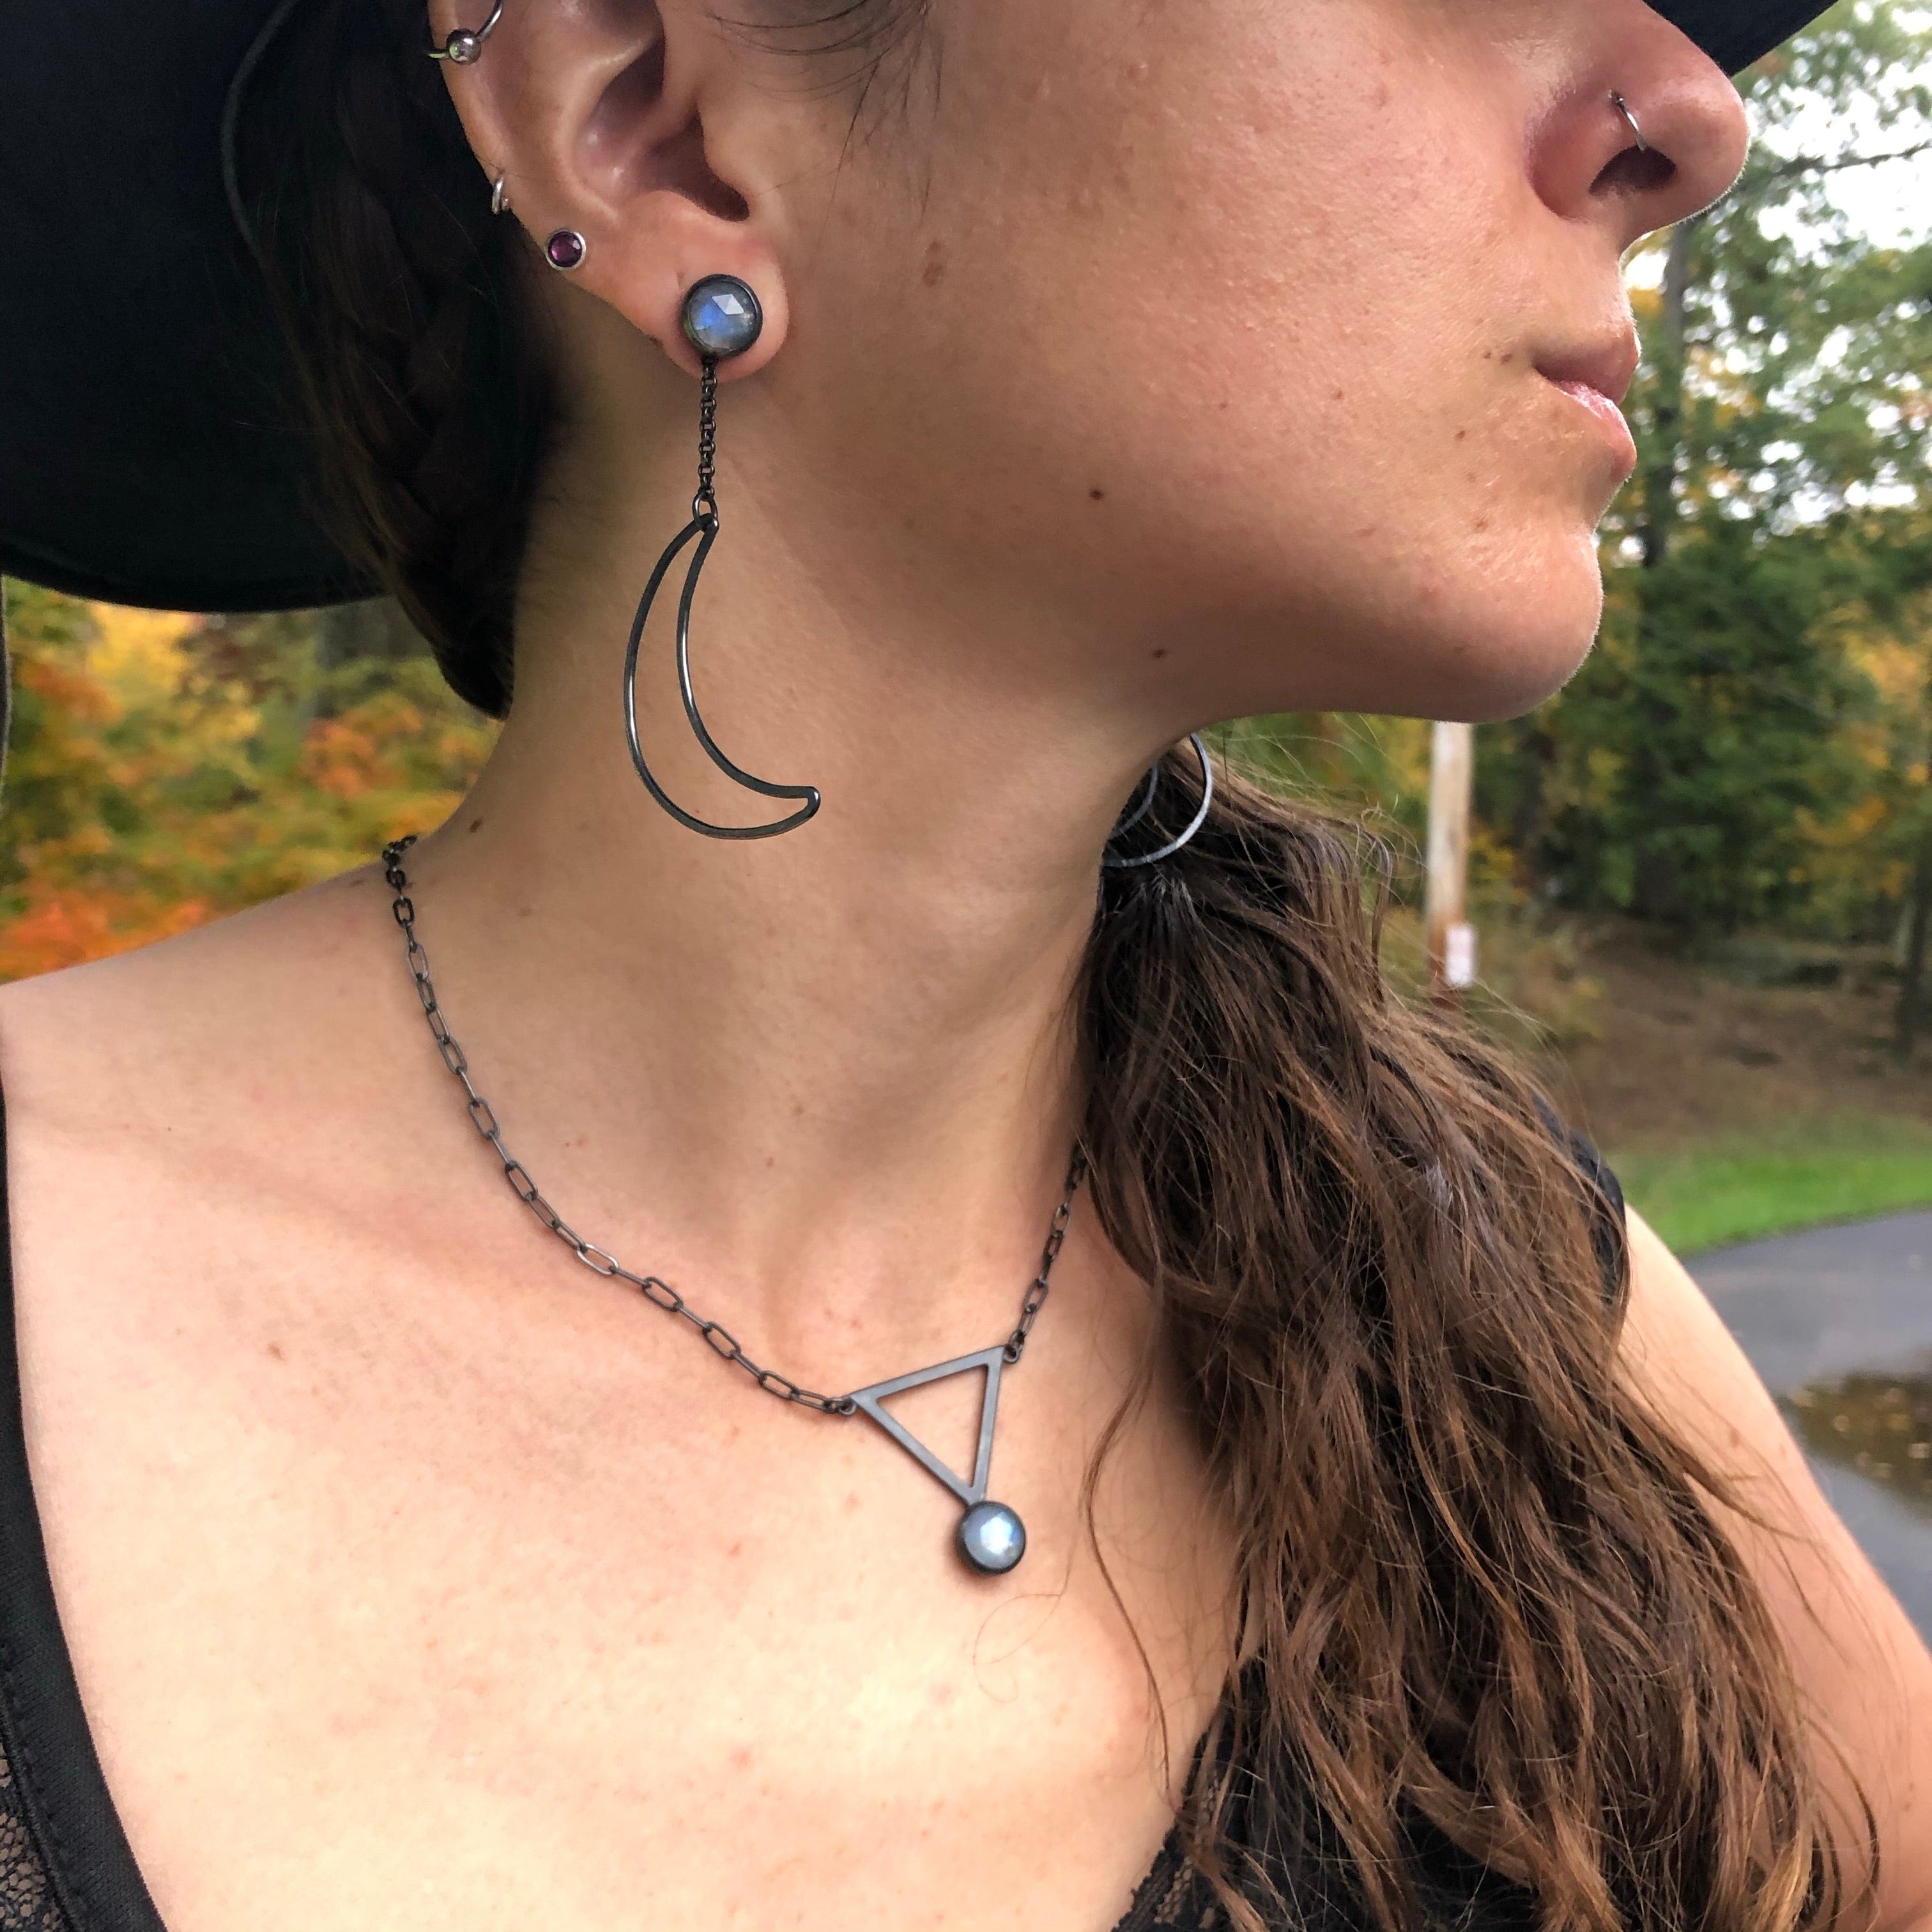 Moon Lovers Trilogy Earrings. Can be styled in 3 different ways! Moonstone set in oxidized sterling silver. Handmade by Alex Lozier Jewelry. Season of the Witch collection.